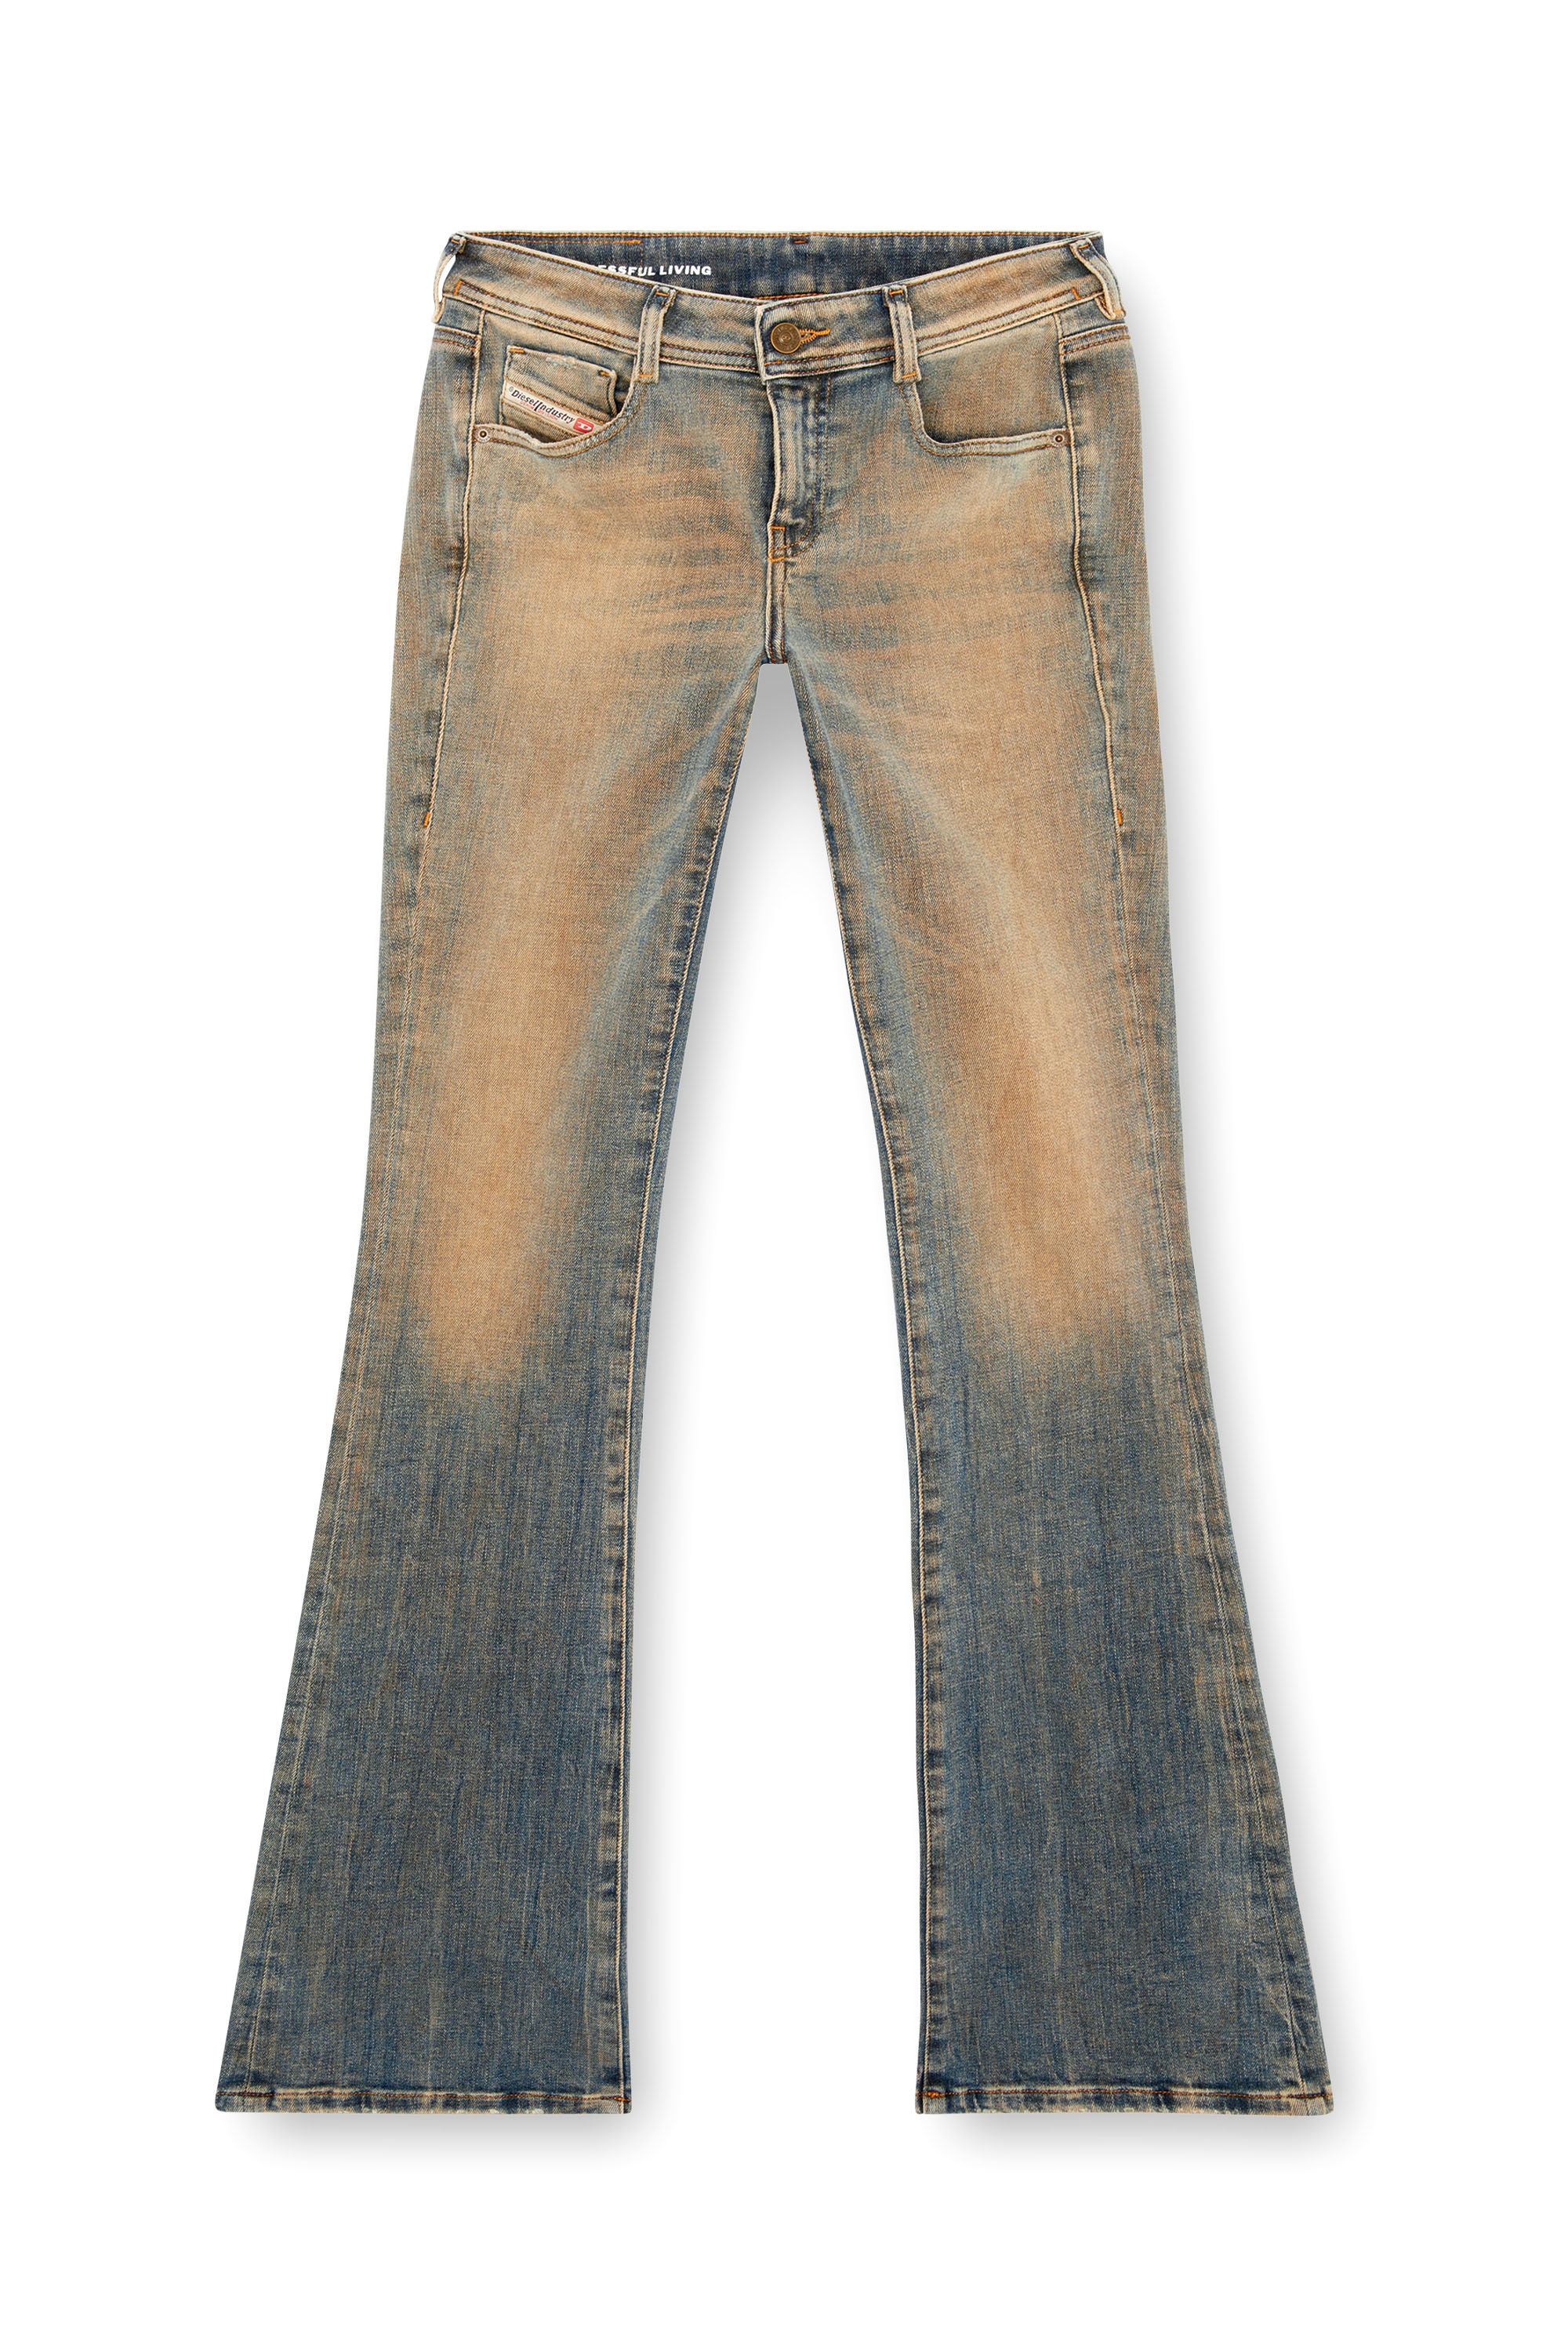 Diesel - Bootcut and Flare Jeans 1969 D-Ebbey 09J23, Mujer Bootcut y Flare Jeans - 1969 D-Ebbey in Azul marino - Image 1